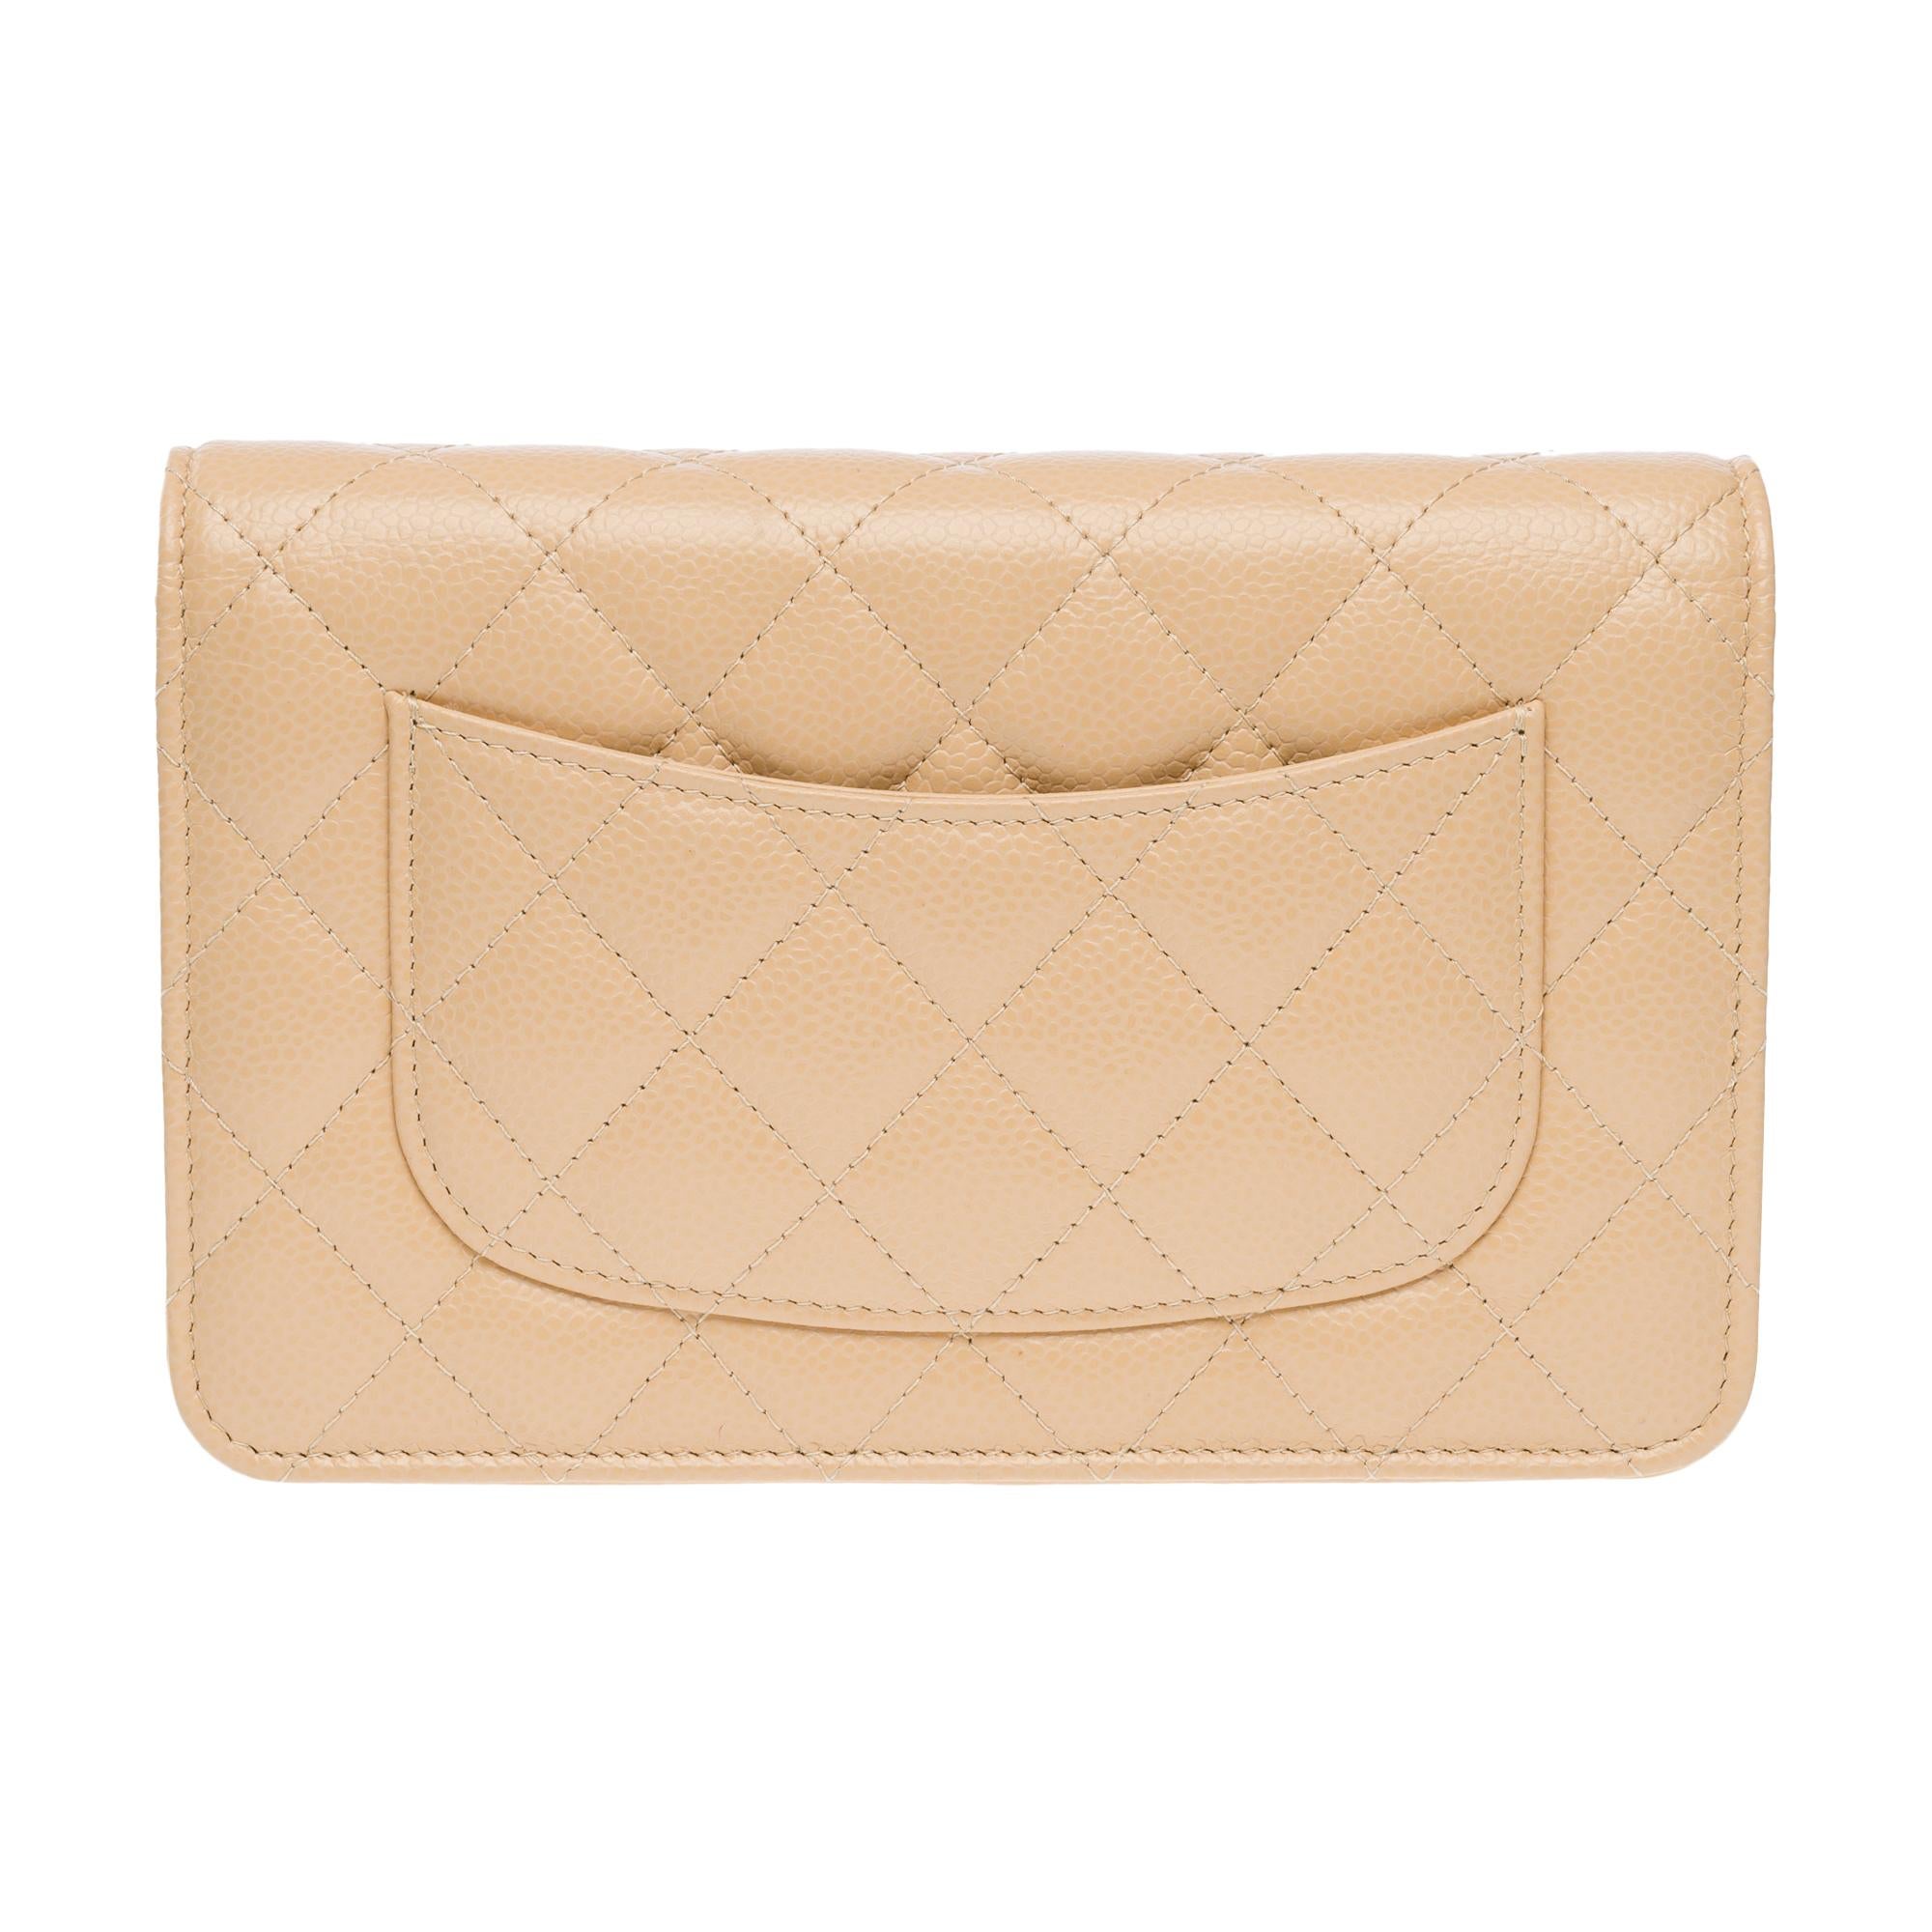 Women's Chanel Wallet on Chain (WOC)  shoulder bag in Beige quilted Caviar leather, GHW For Sale